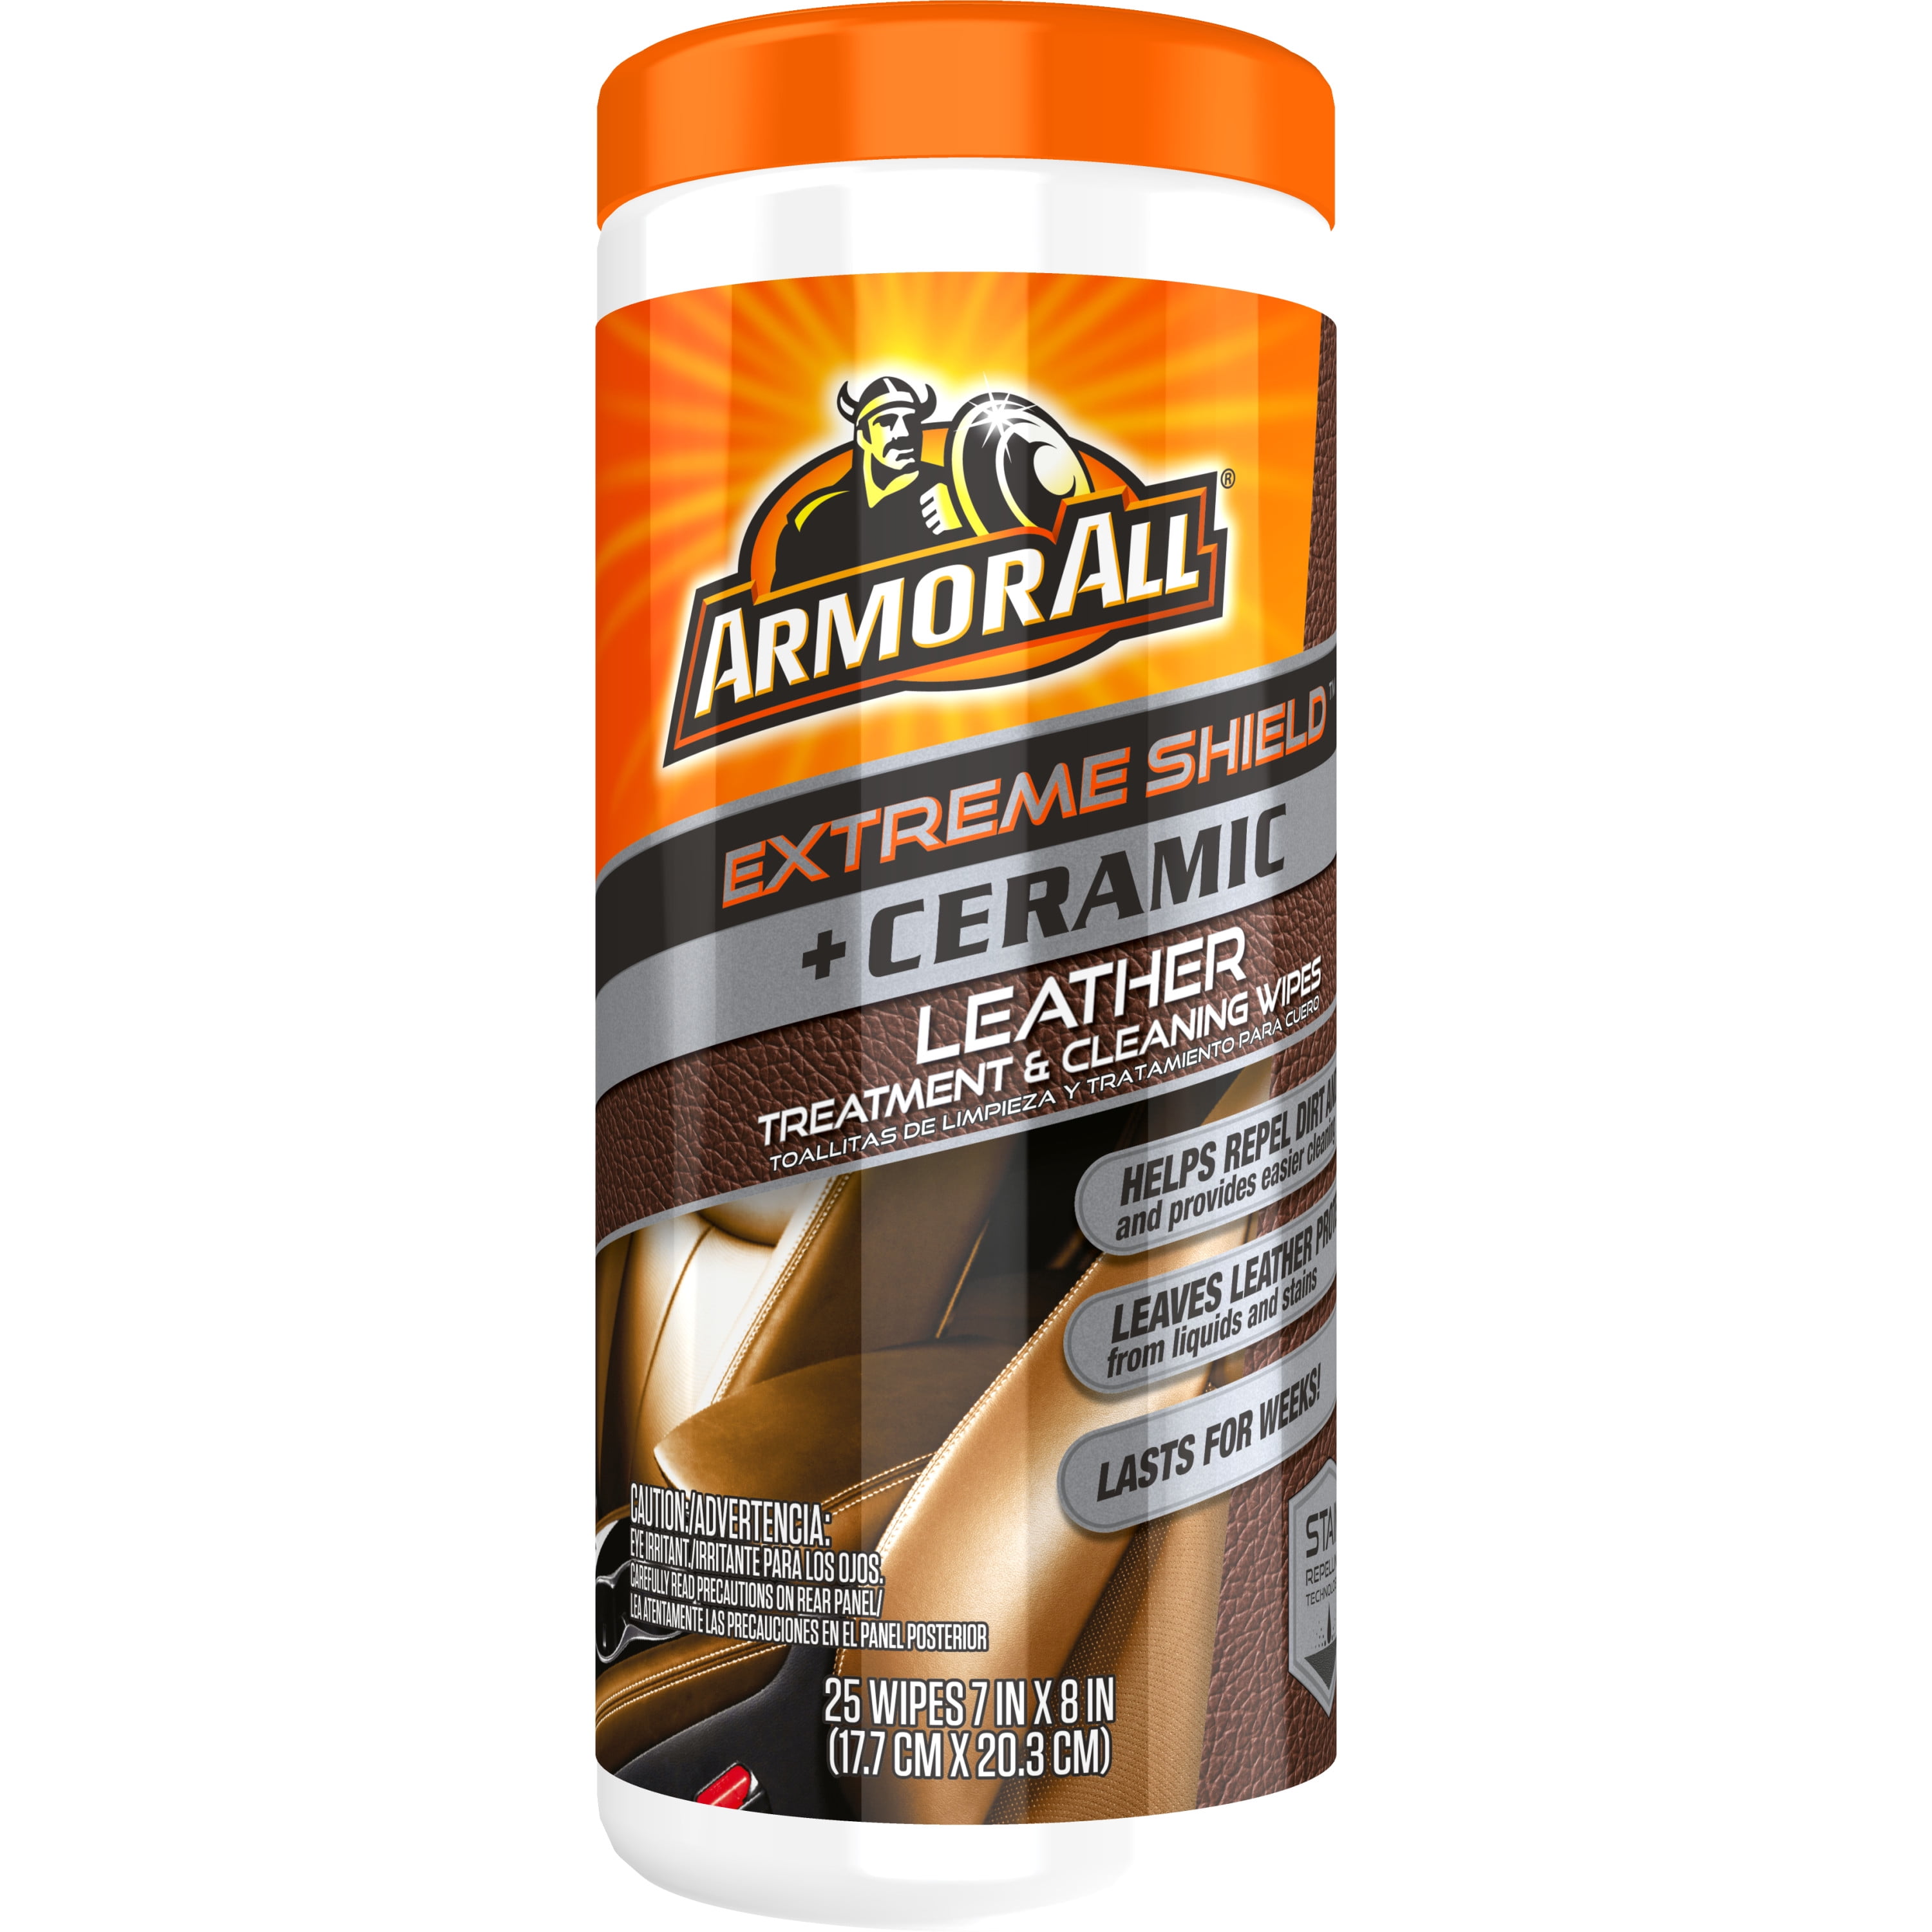 Armor All Extreme Shield Protectant Wipes - 25 Count